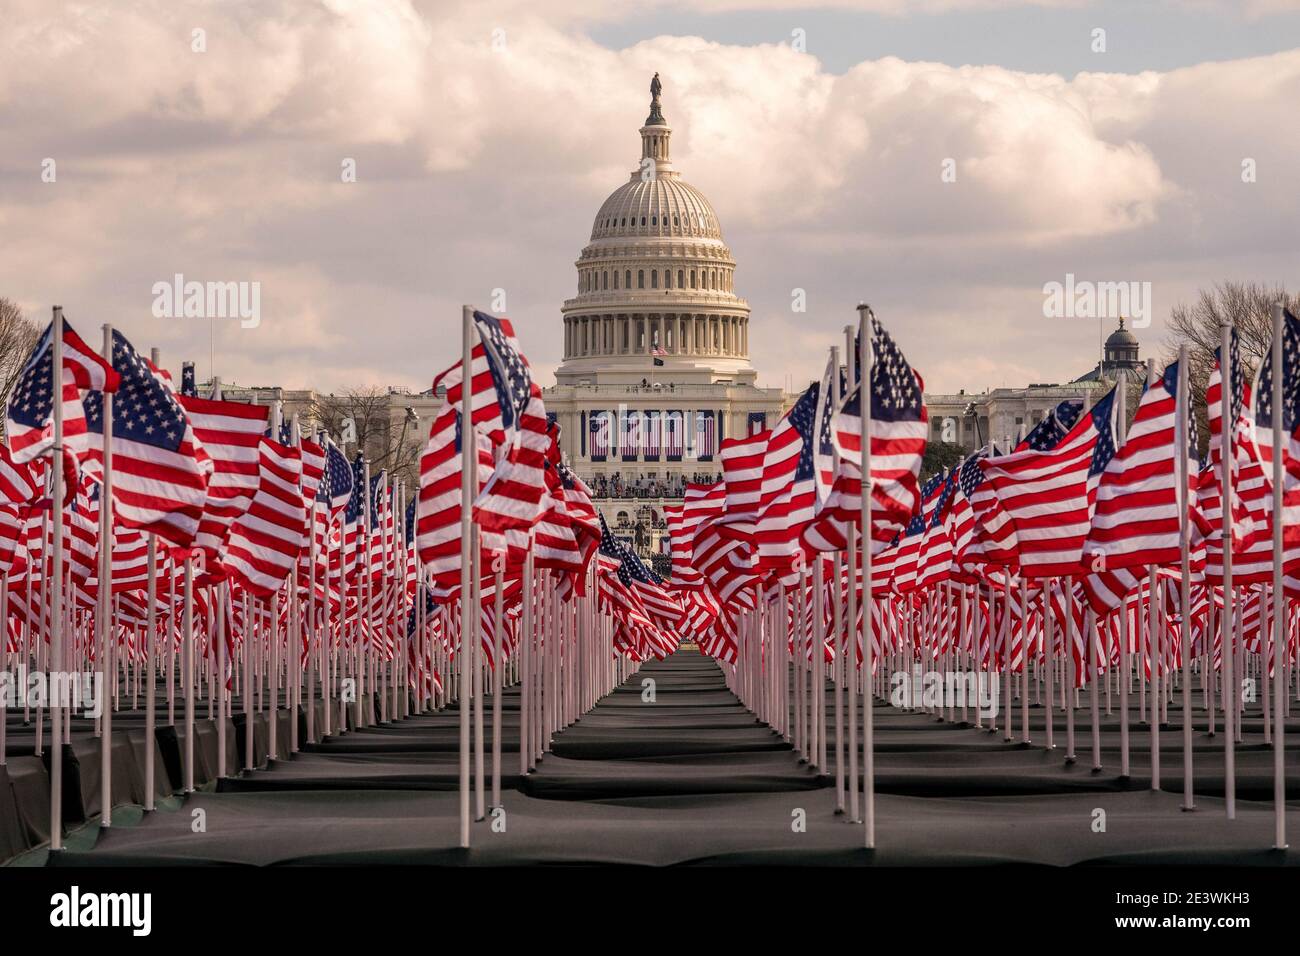 Washington, United States. 20th Jan, 2021. The U.S. Capitol is seen through thousands of American flags prior to President Joseph Robinette Biden Jr. taking the oath of office as the 46th President of the United States at the Capitol in Washington, DC on Wednesday, January 20, 2021. Photo by Ken Cedeno/UPI Credit: UPI/Alamy Live News Stock Photo